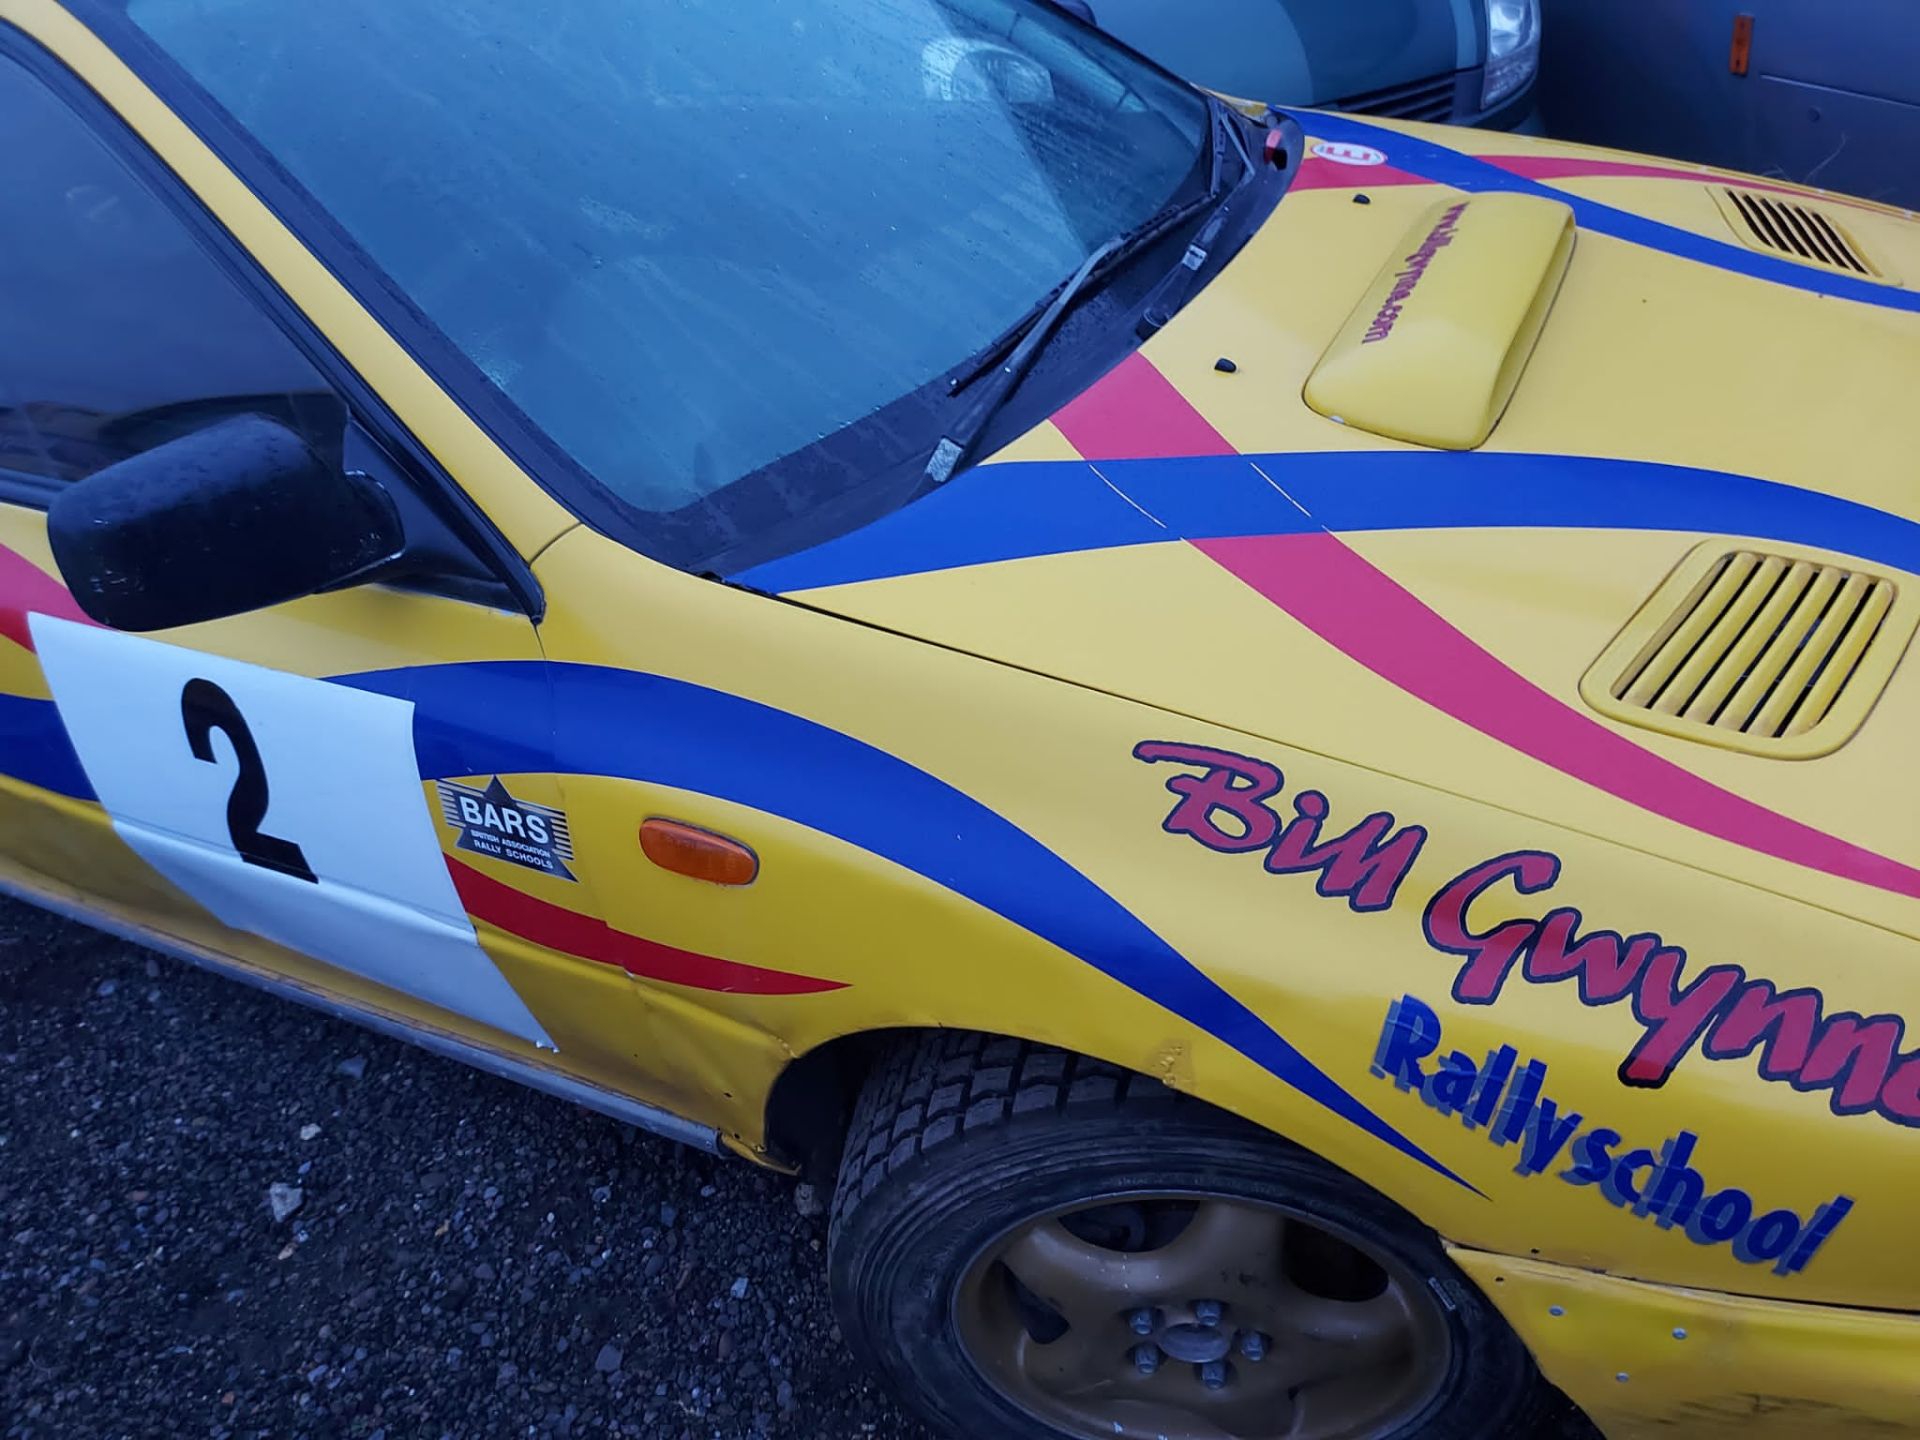 Subaru WRX Rally Modified car with fitted roll cage - Image 15 of 17